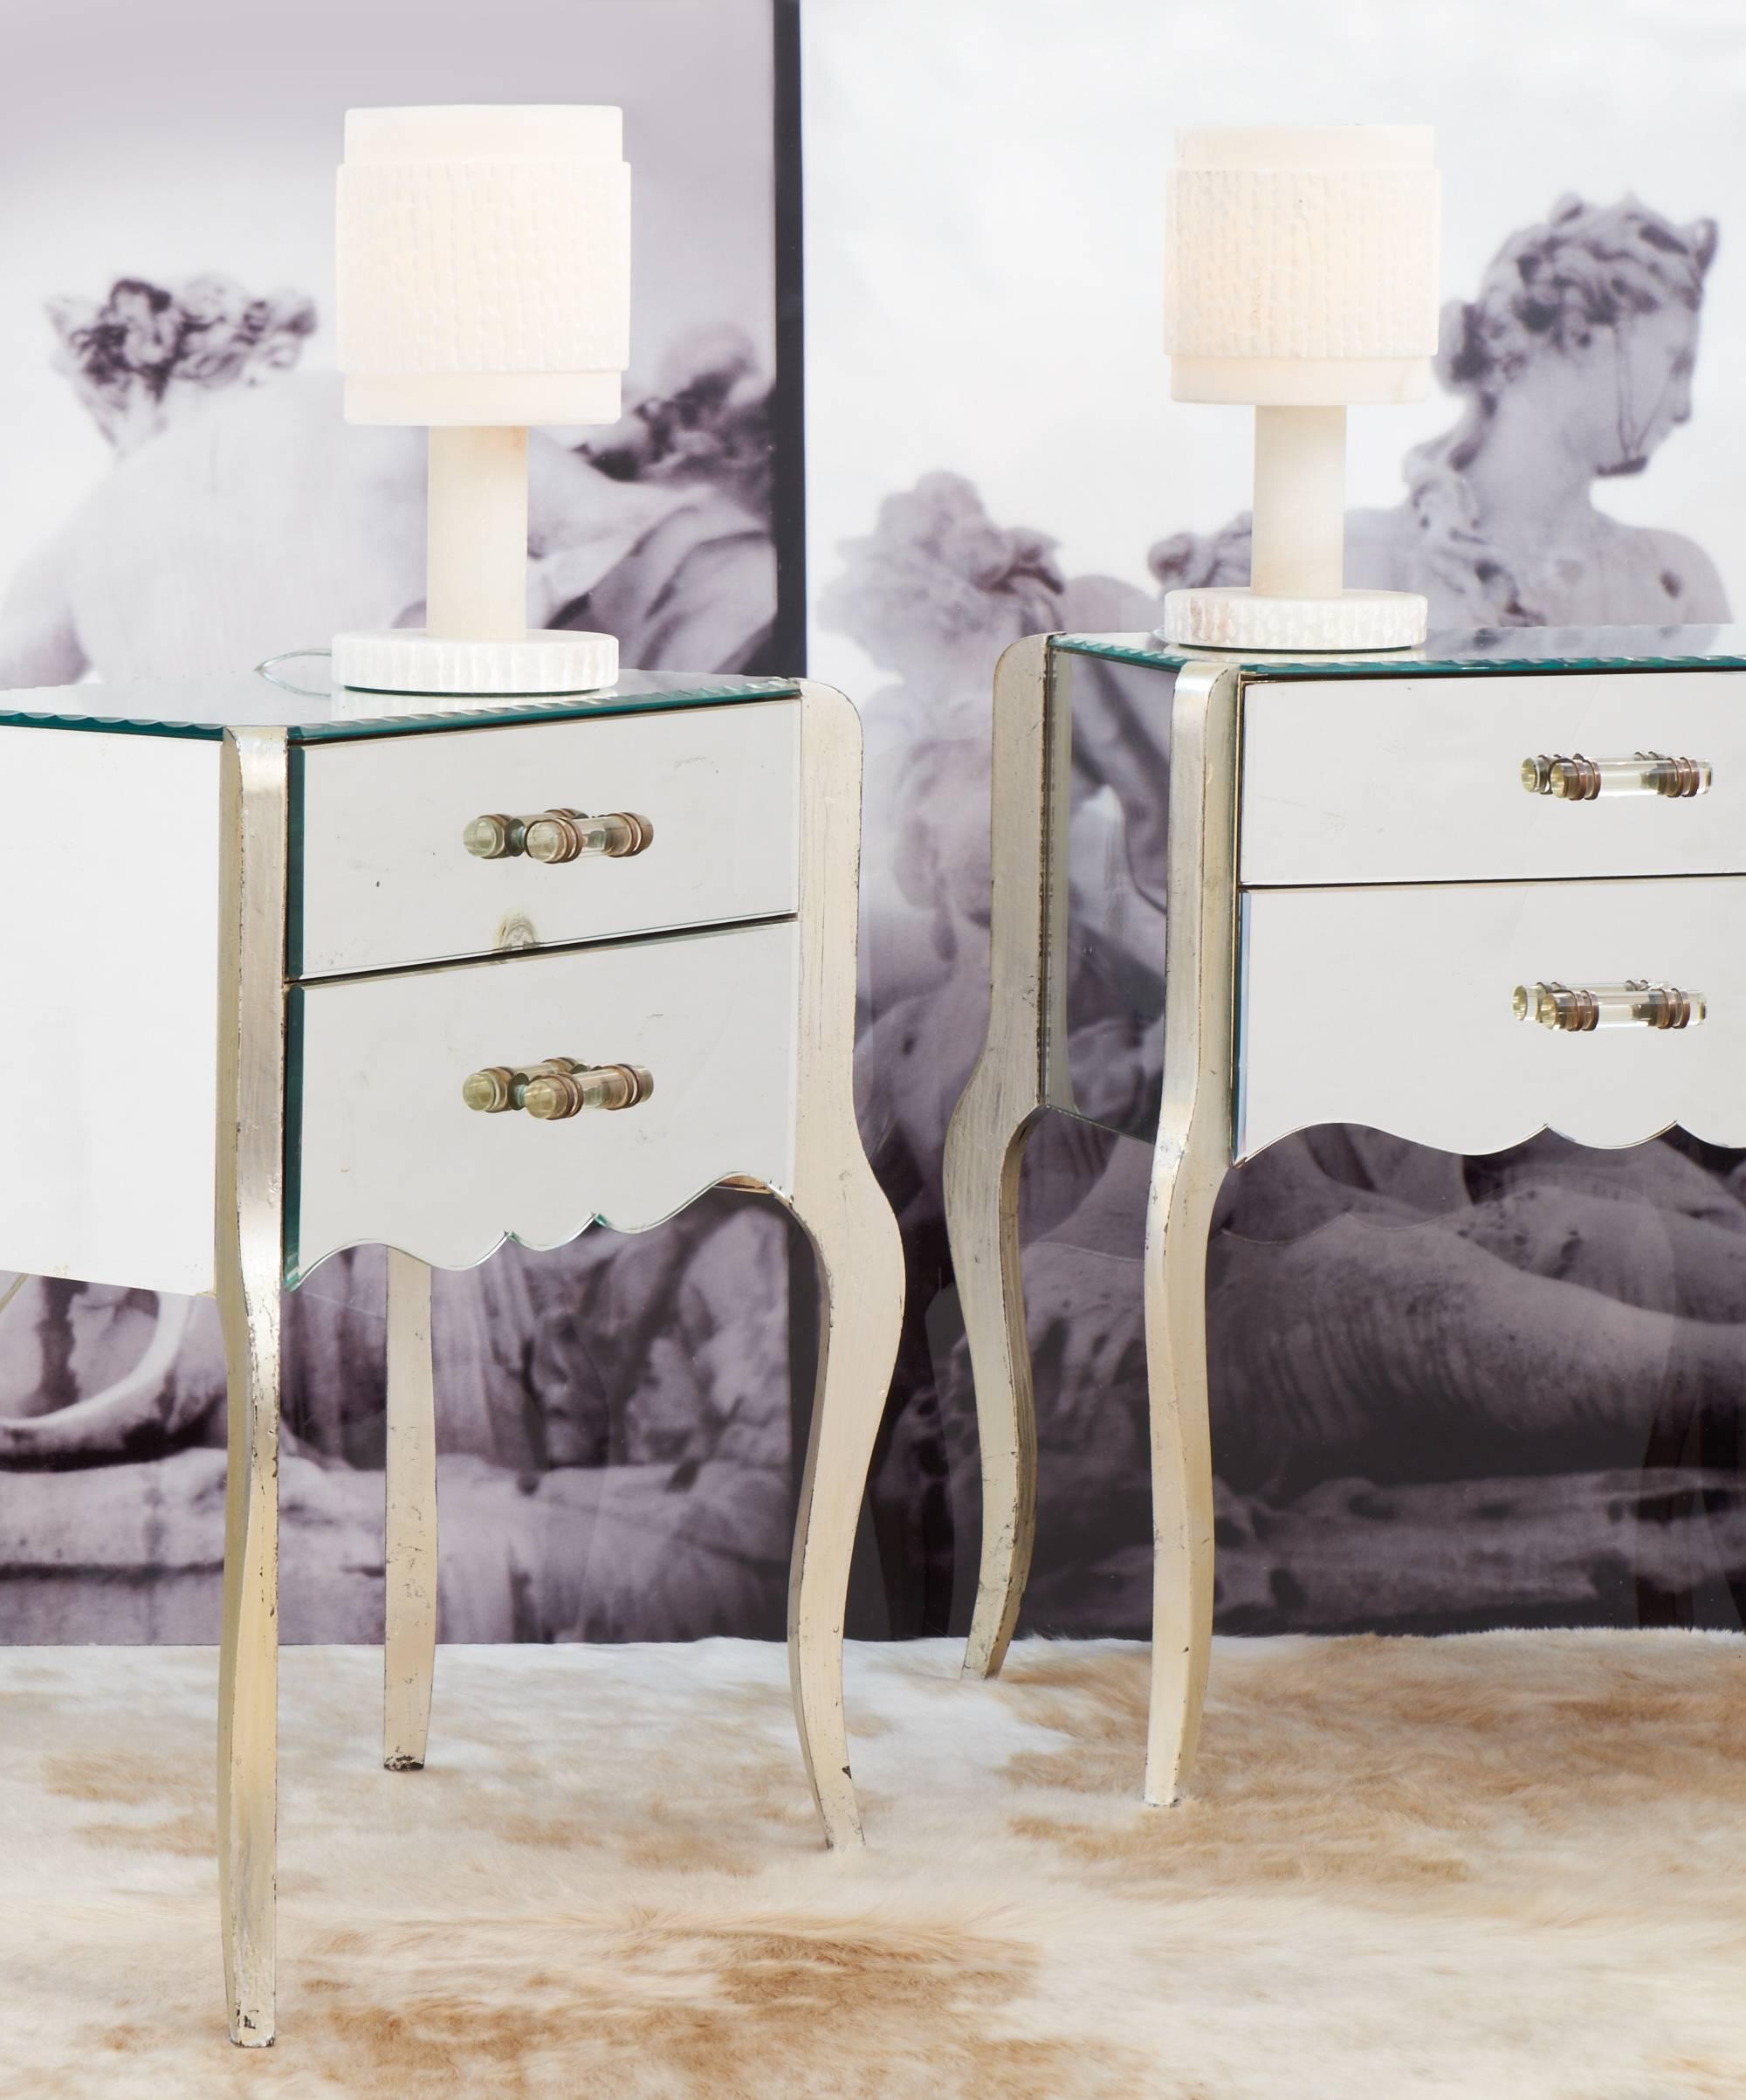 Precious Vintage French pair of side tables or nightstands with mirrored tops, sides and drawers. Mirrored tops have scalloped edges. Silver leafed legs and original glass rod handles on two drawers for each end table. Charming and feminine, these